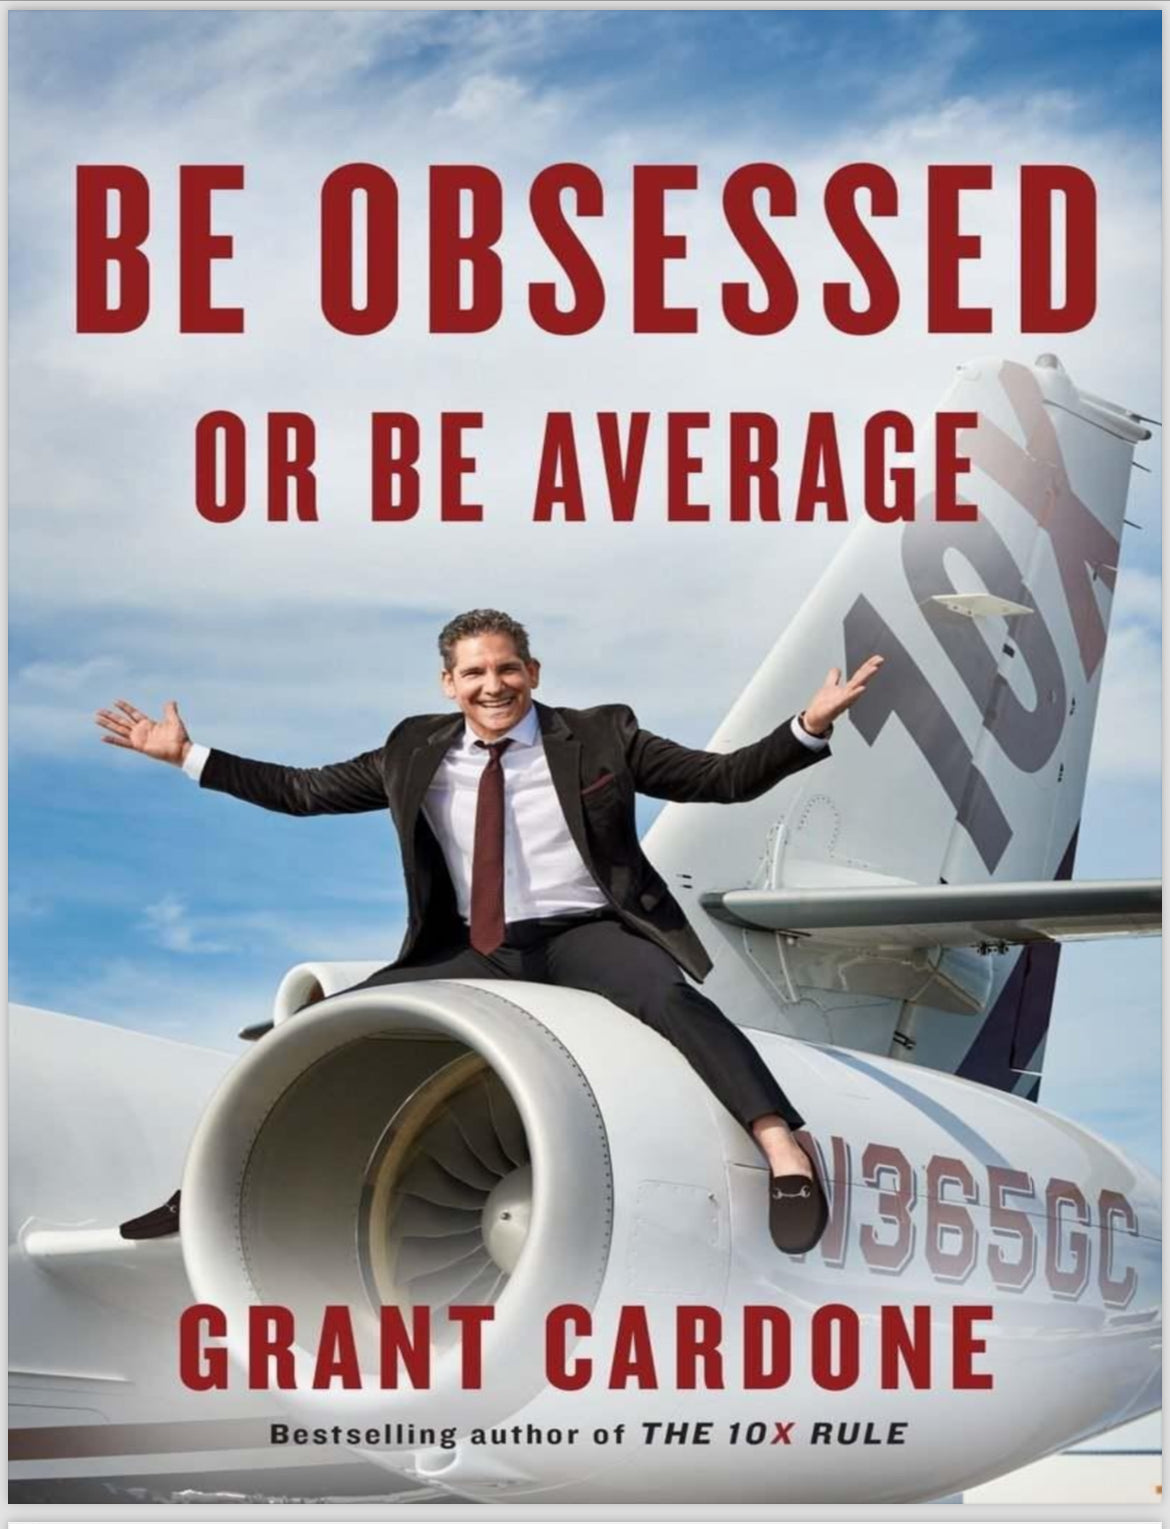 BE OBSESSED OR BE AVERAGE BY GRANT CARDONE